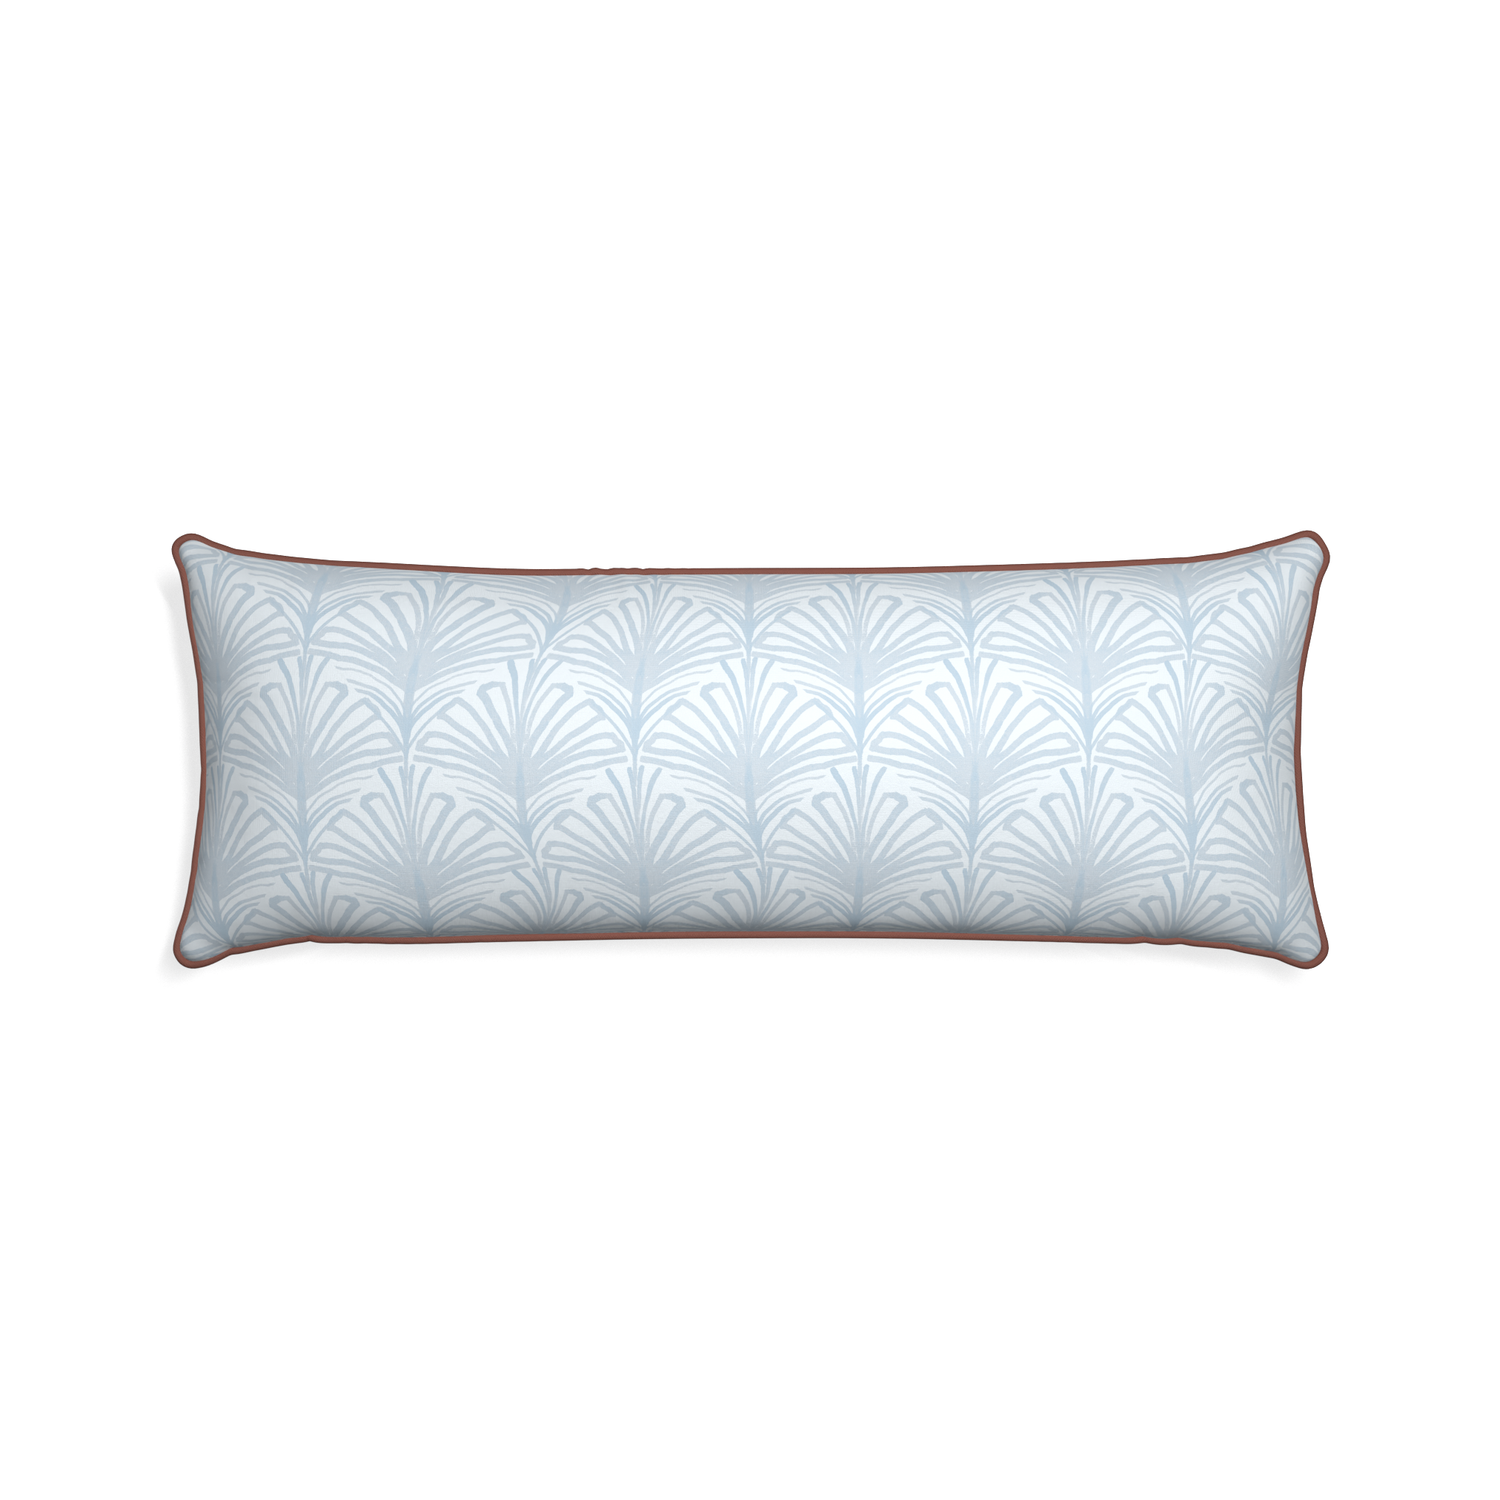 Xl-lumbar suzy sky custom pillow with w piping on white background